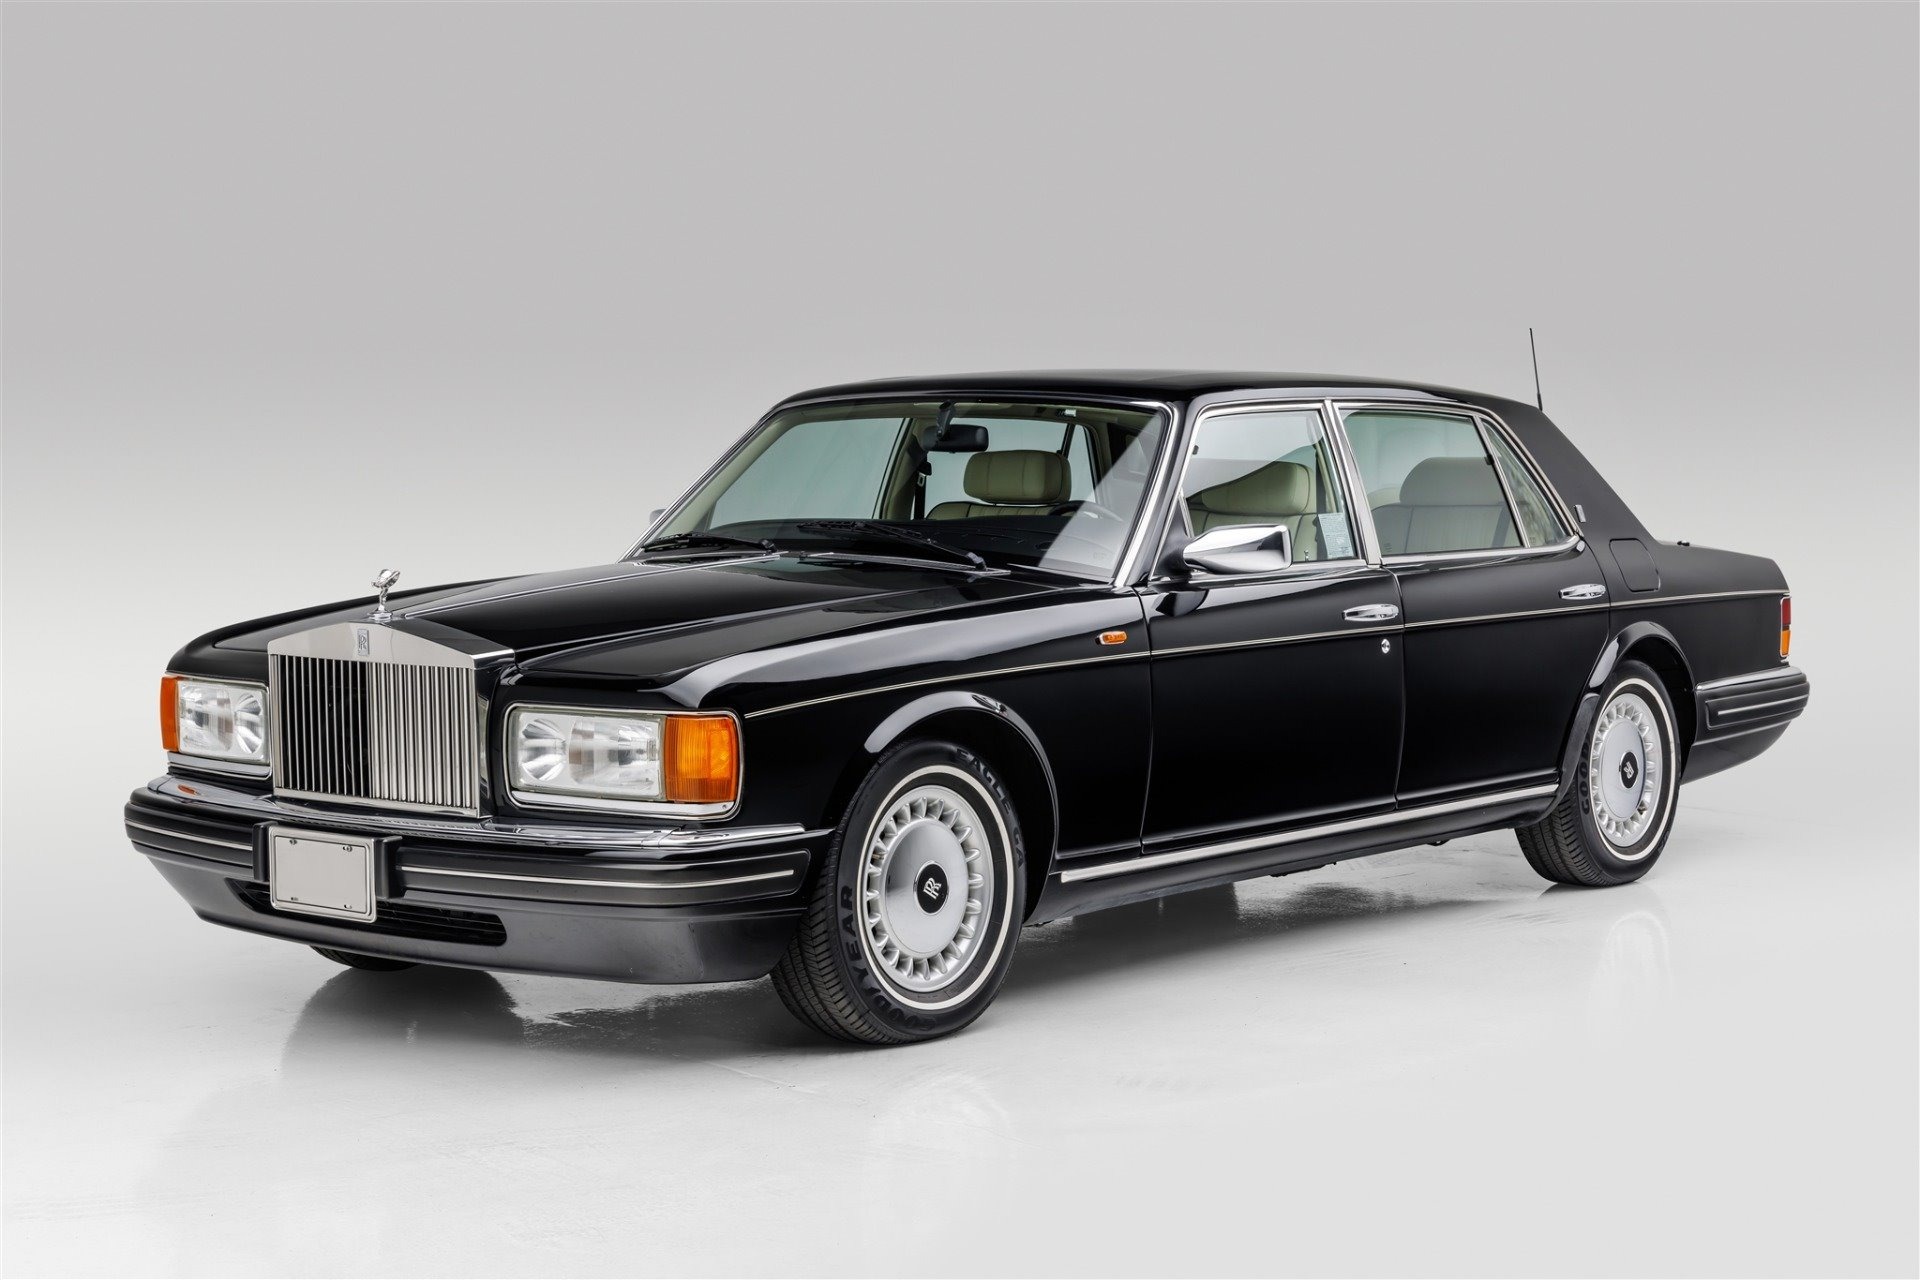 Used 1997 Rolls-Royce Silver Spur Light Turbocharge 296Hp V8 For